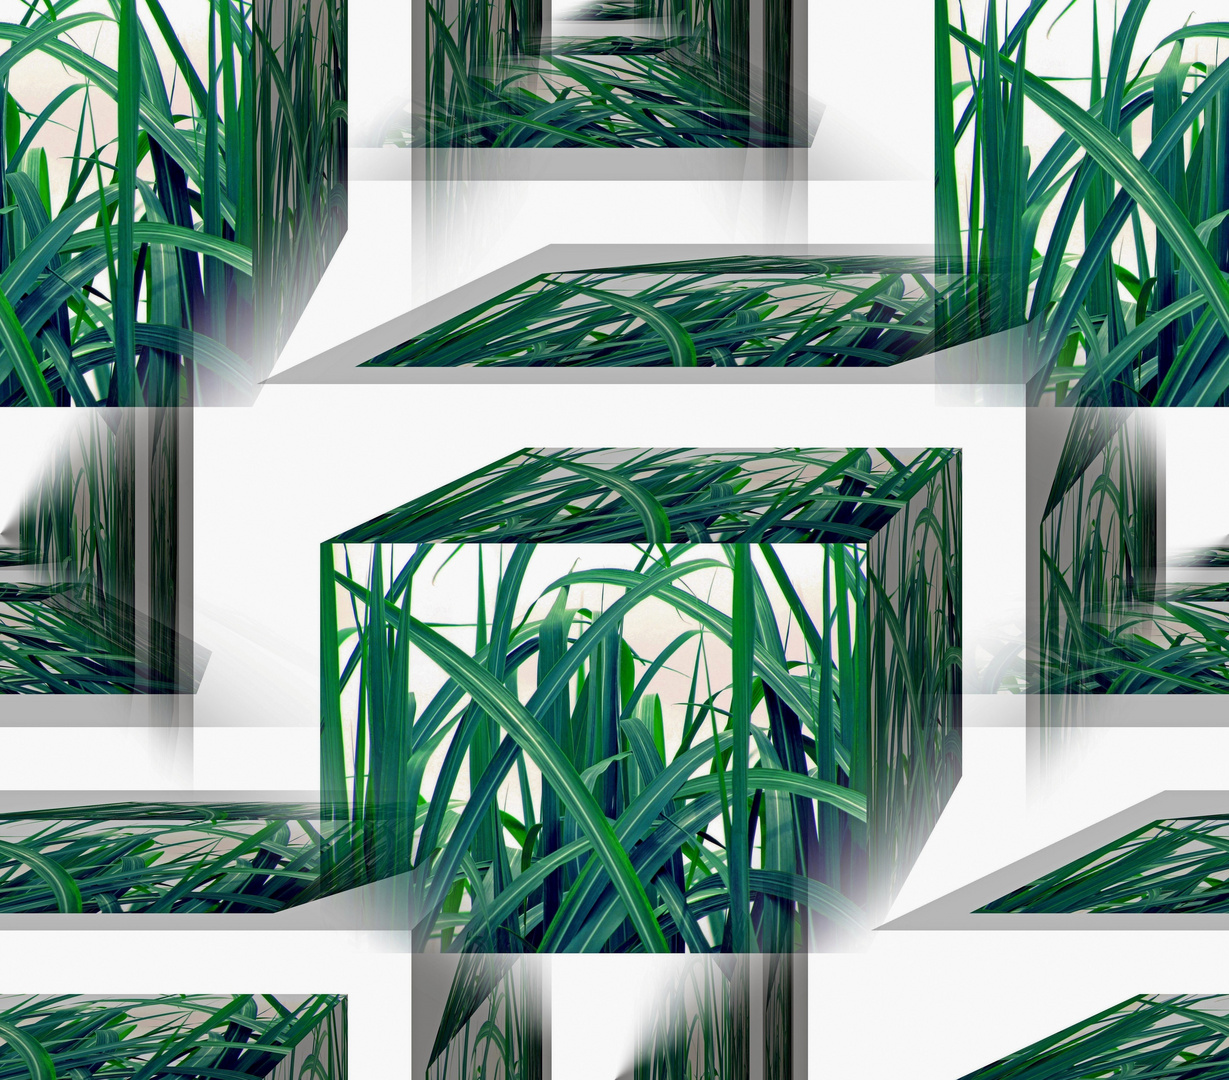 Grass In Boxes